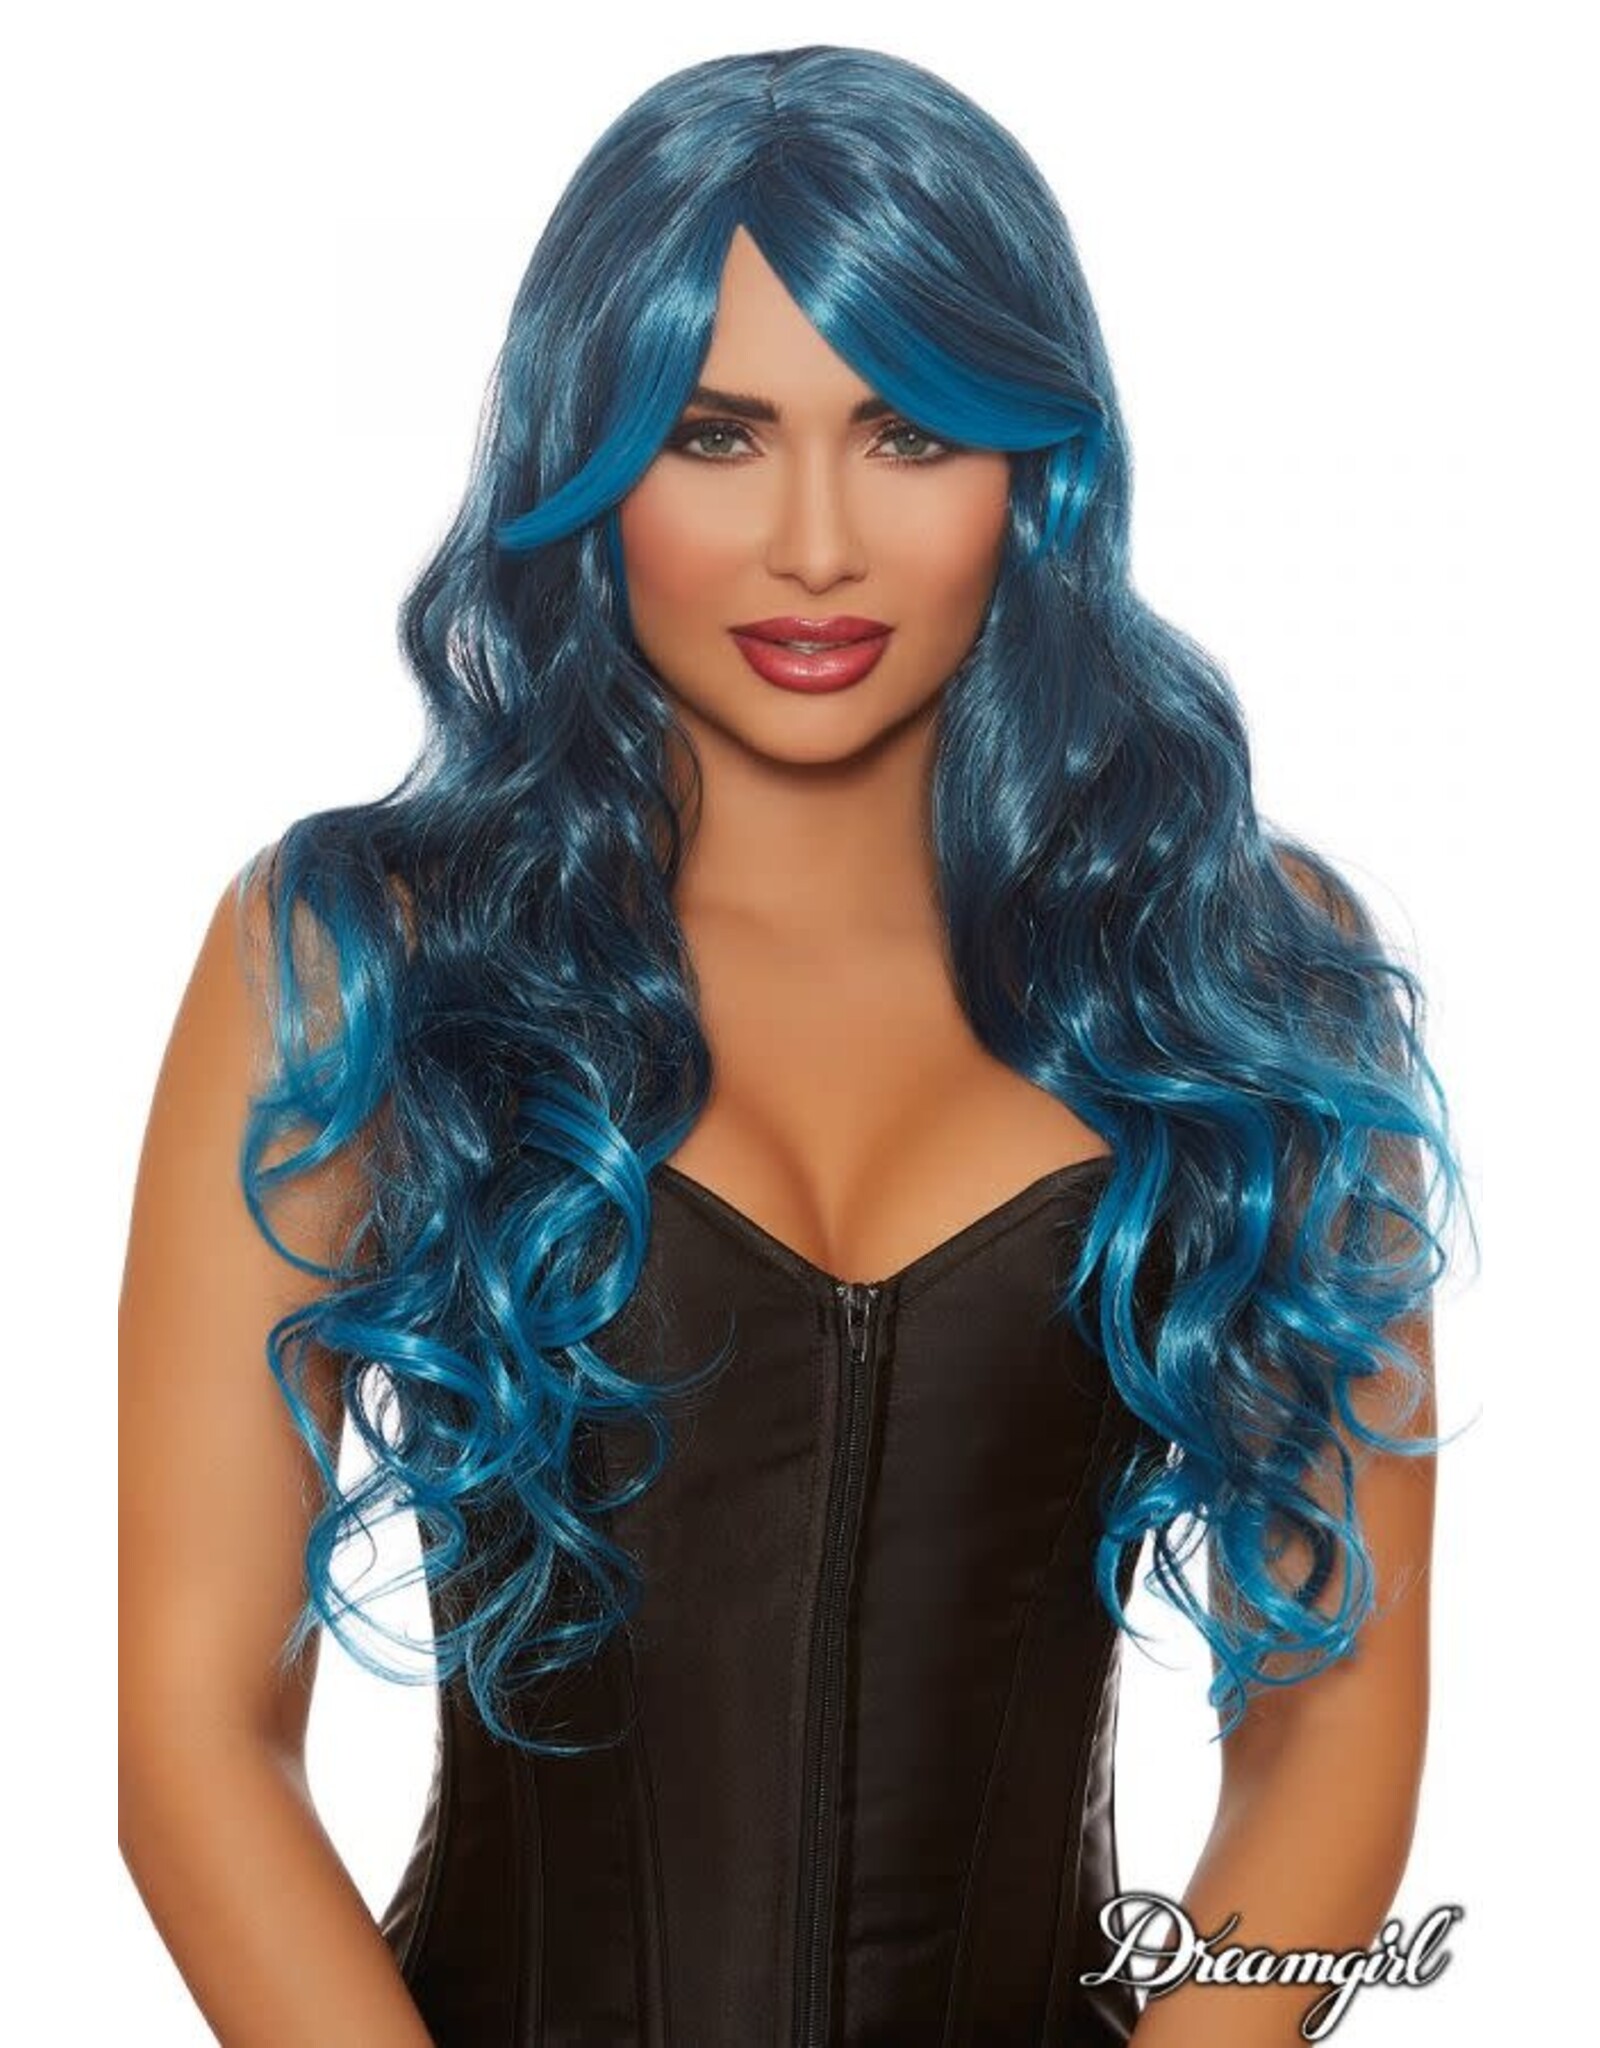 Dreamgirl Adjustable Long Wavy Ombre Layered Wig - Steel Blue